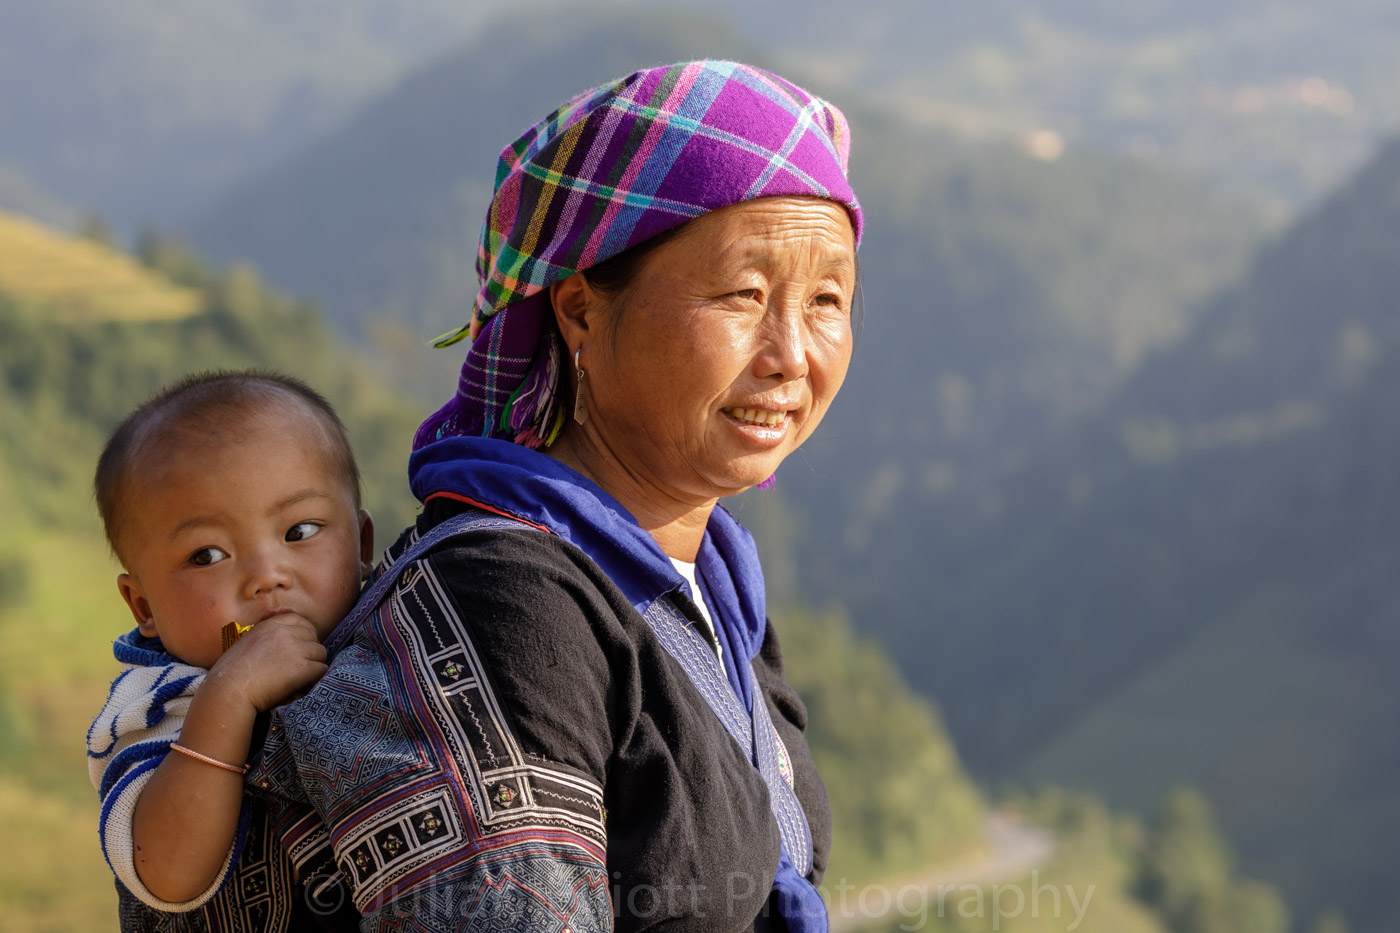 A woman from the Hmong tribe in Sa Pa